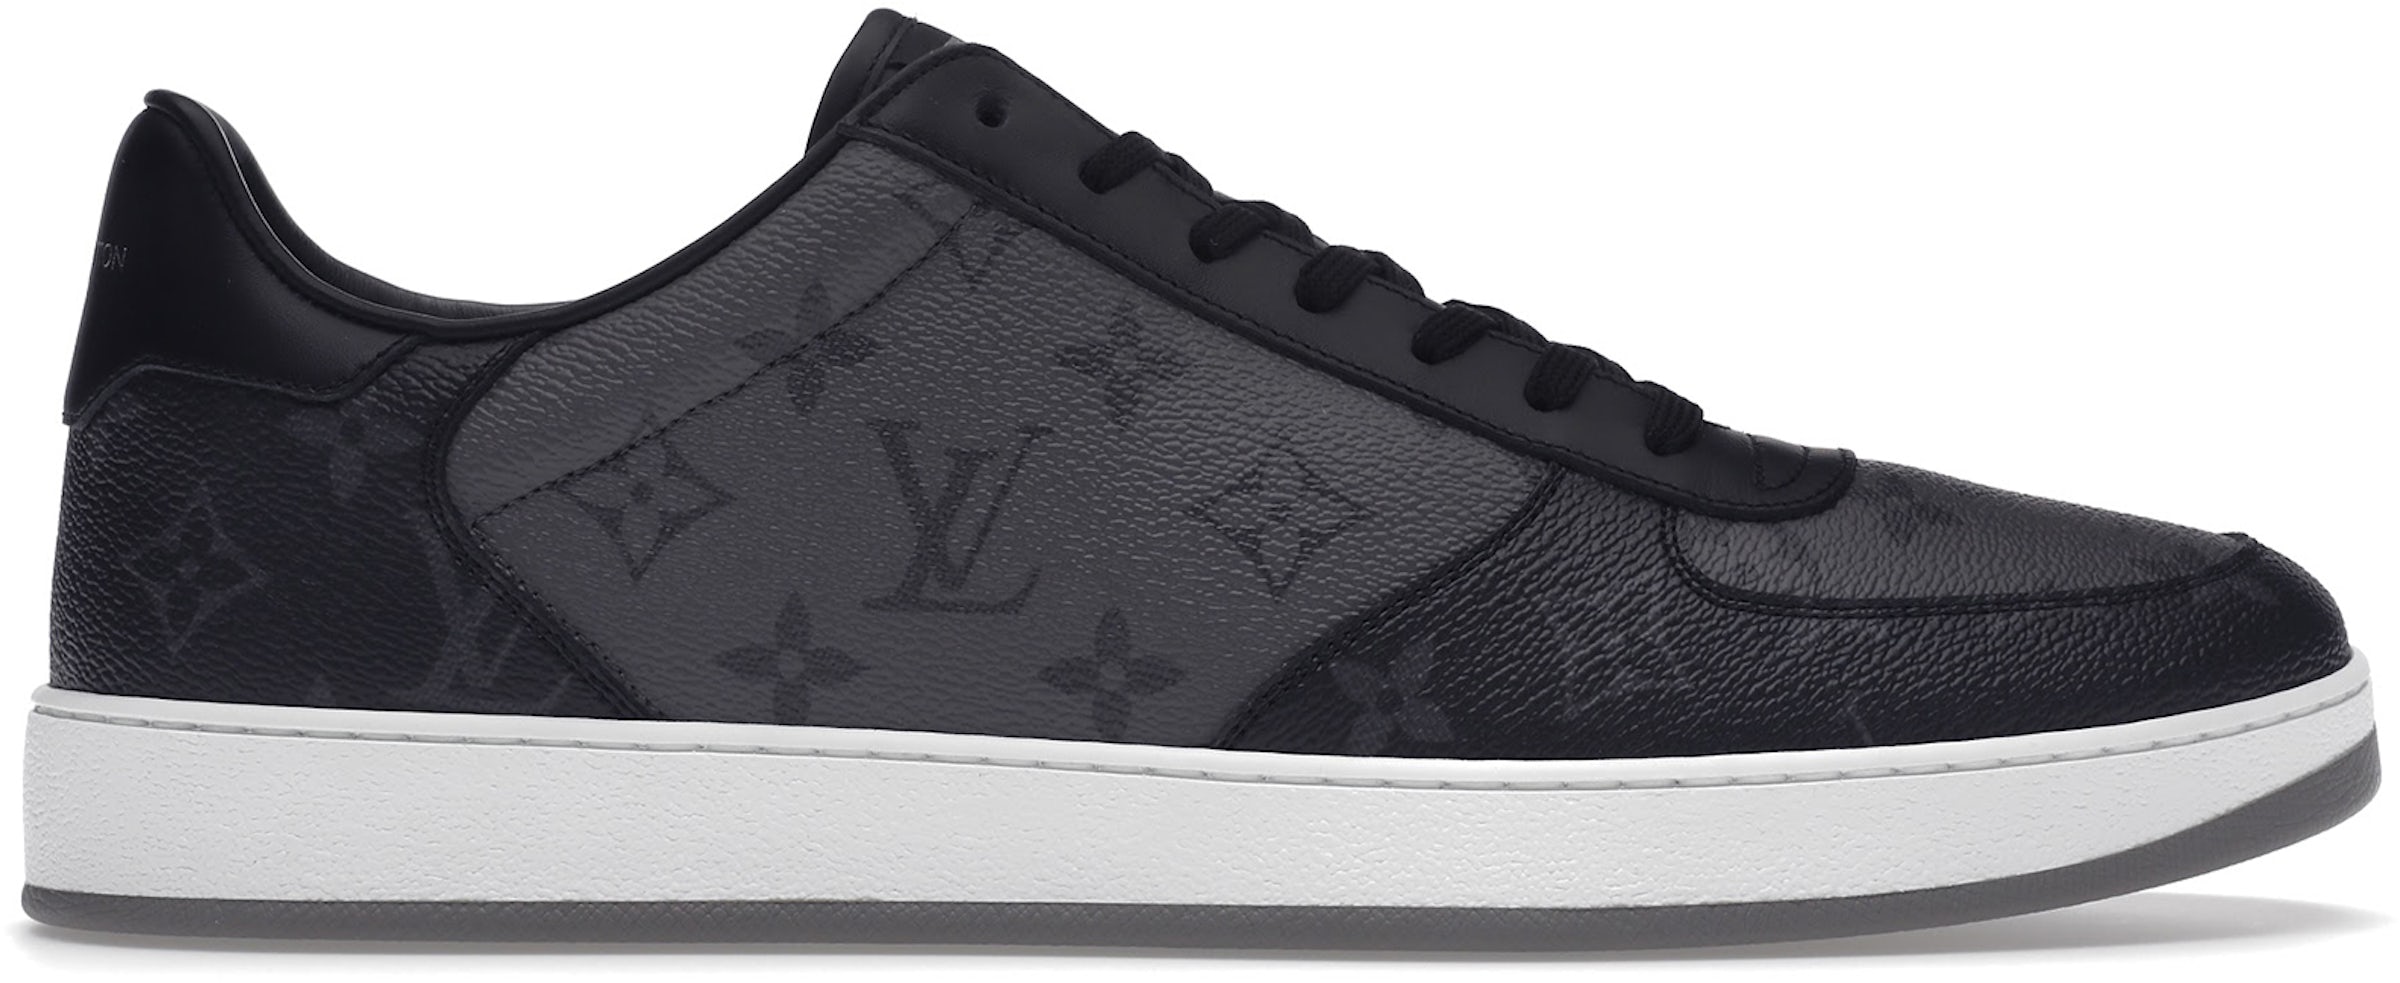 Buy Louis Vuitton Size 10 Shoes & New Sneakers - StockX